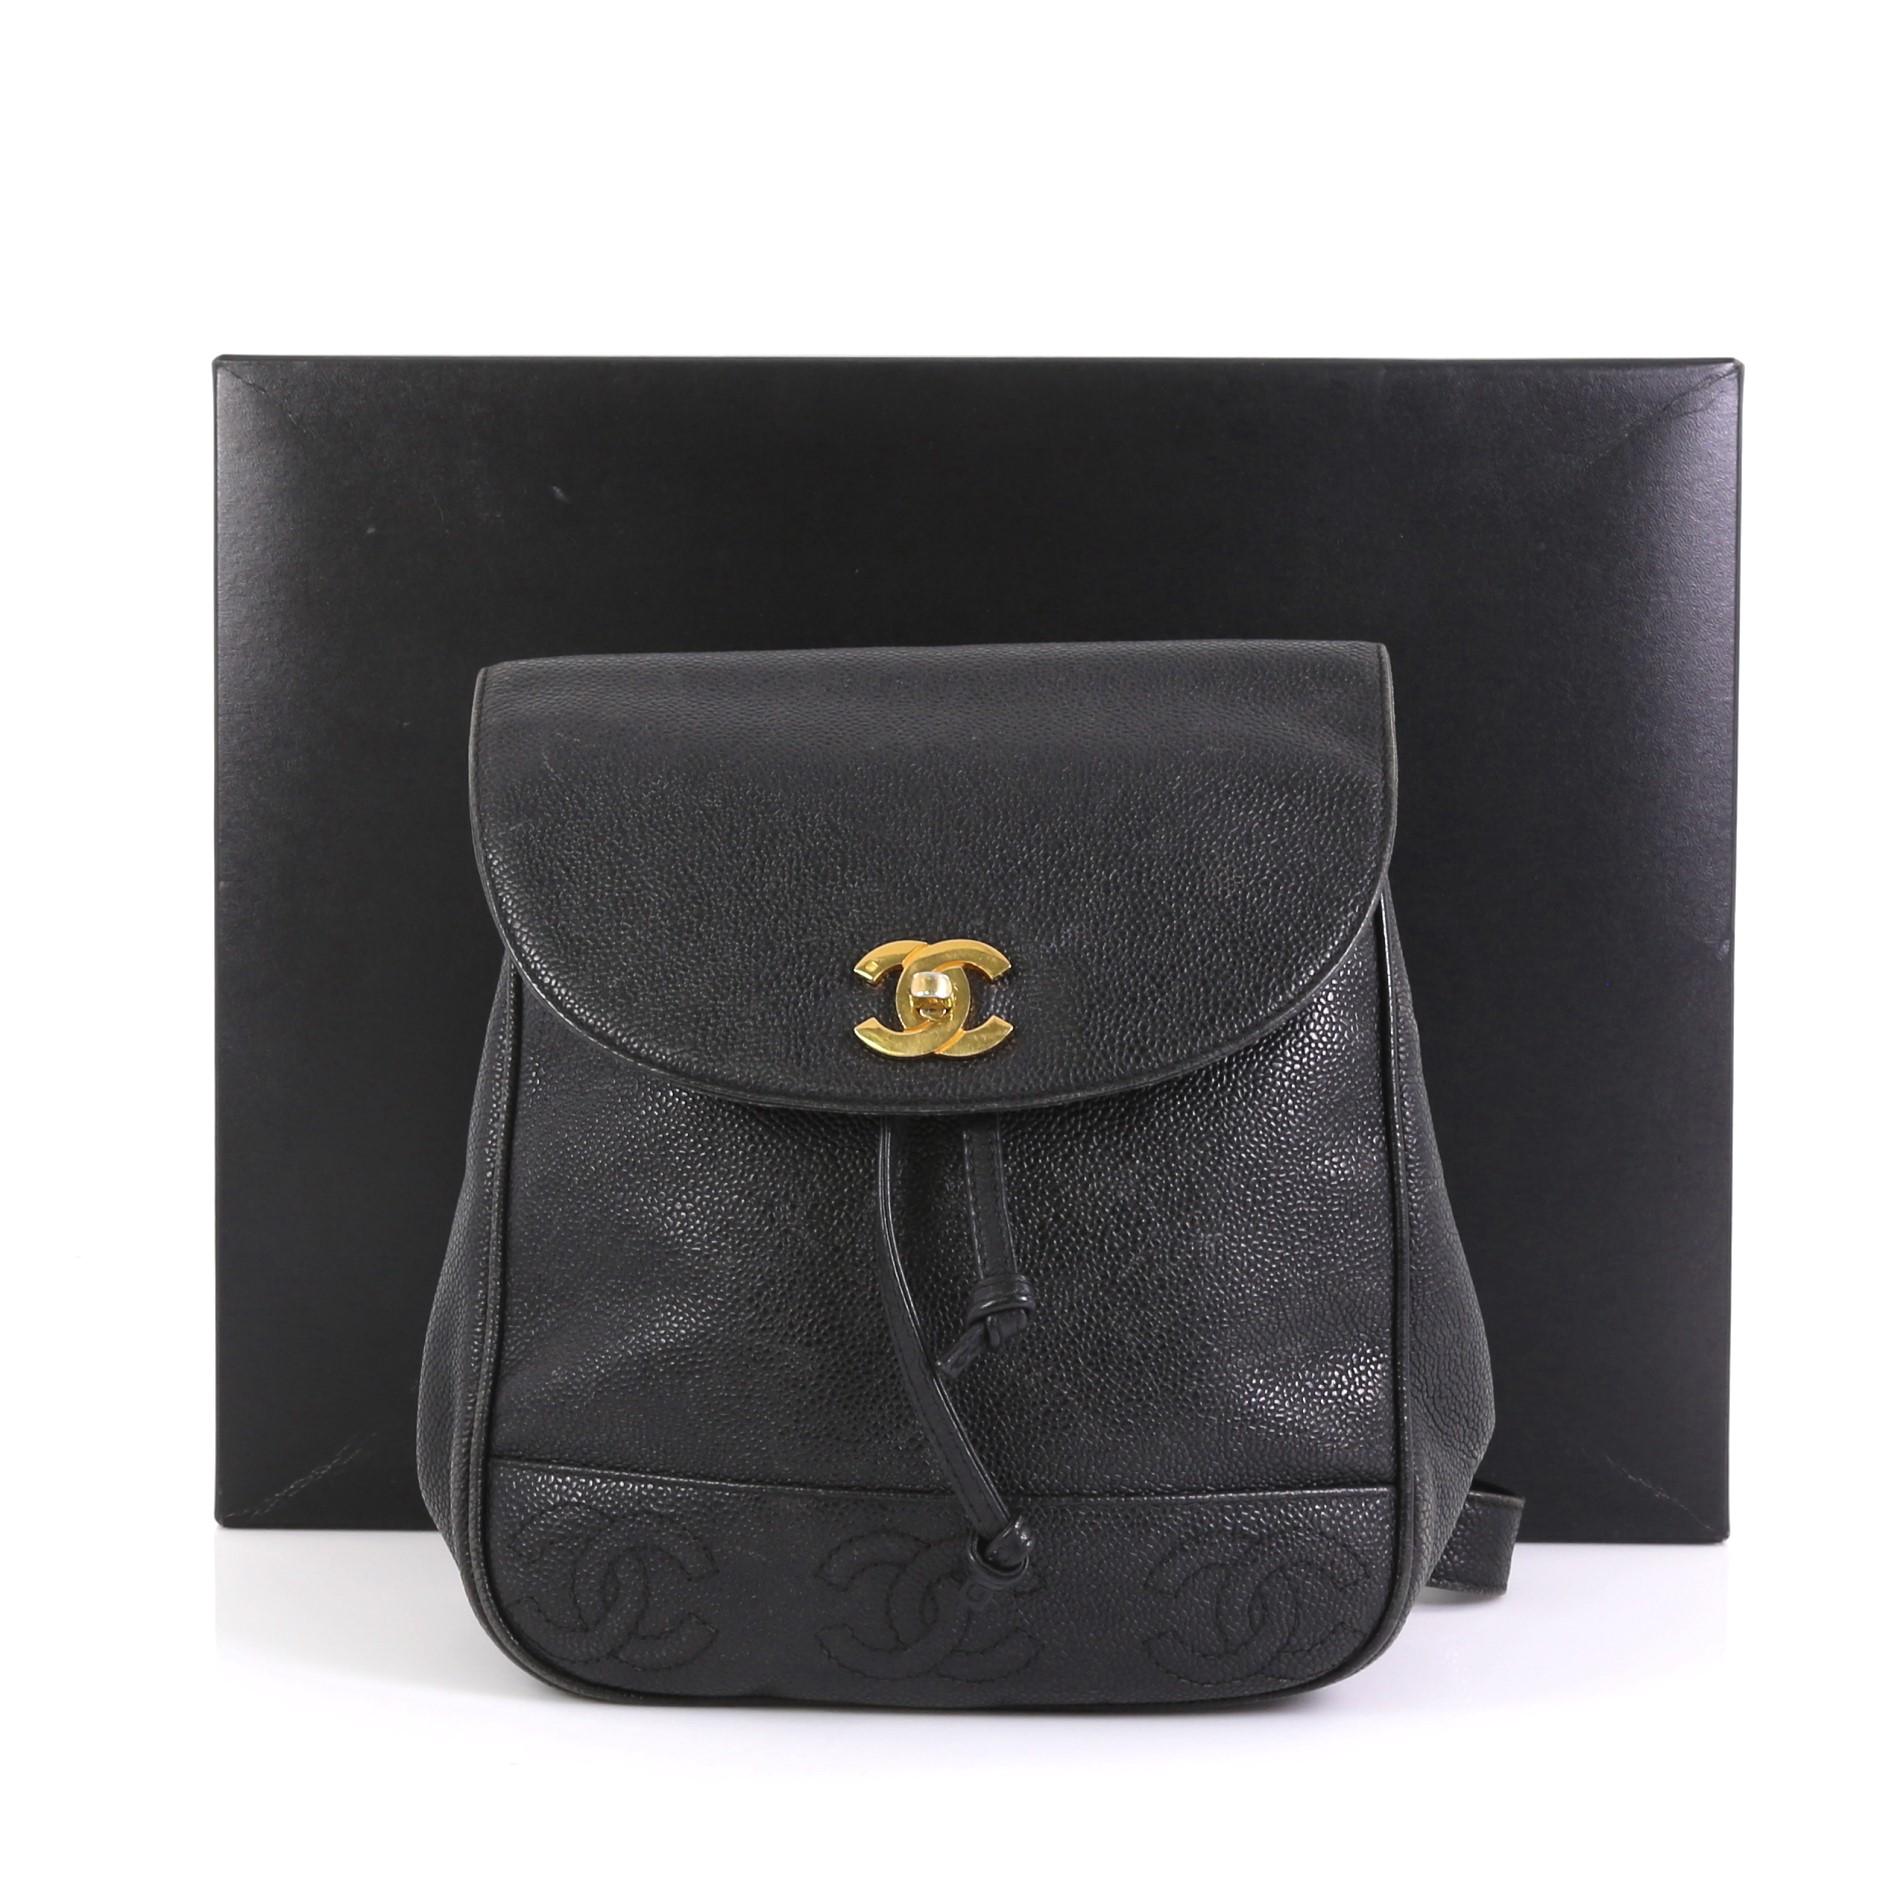 This Chanel Vintage Backpack Caviar Small, crafted from black caviar leather, features CC stitched design at the bottom, leather straps, and gold-tone hardware. Its CC turn-lock and drawstring closure opens to a black fabric interior with zip